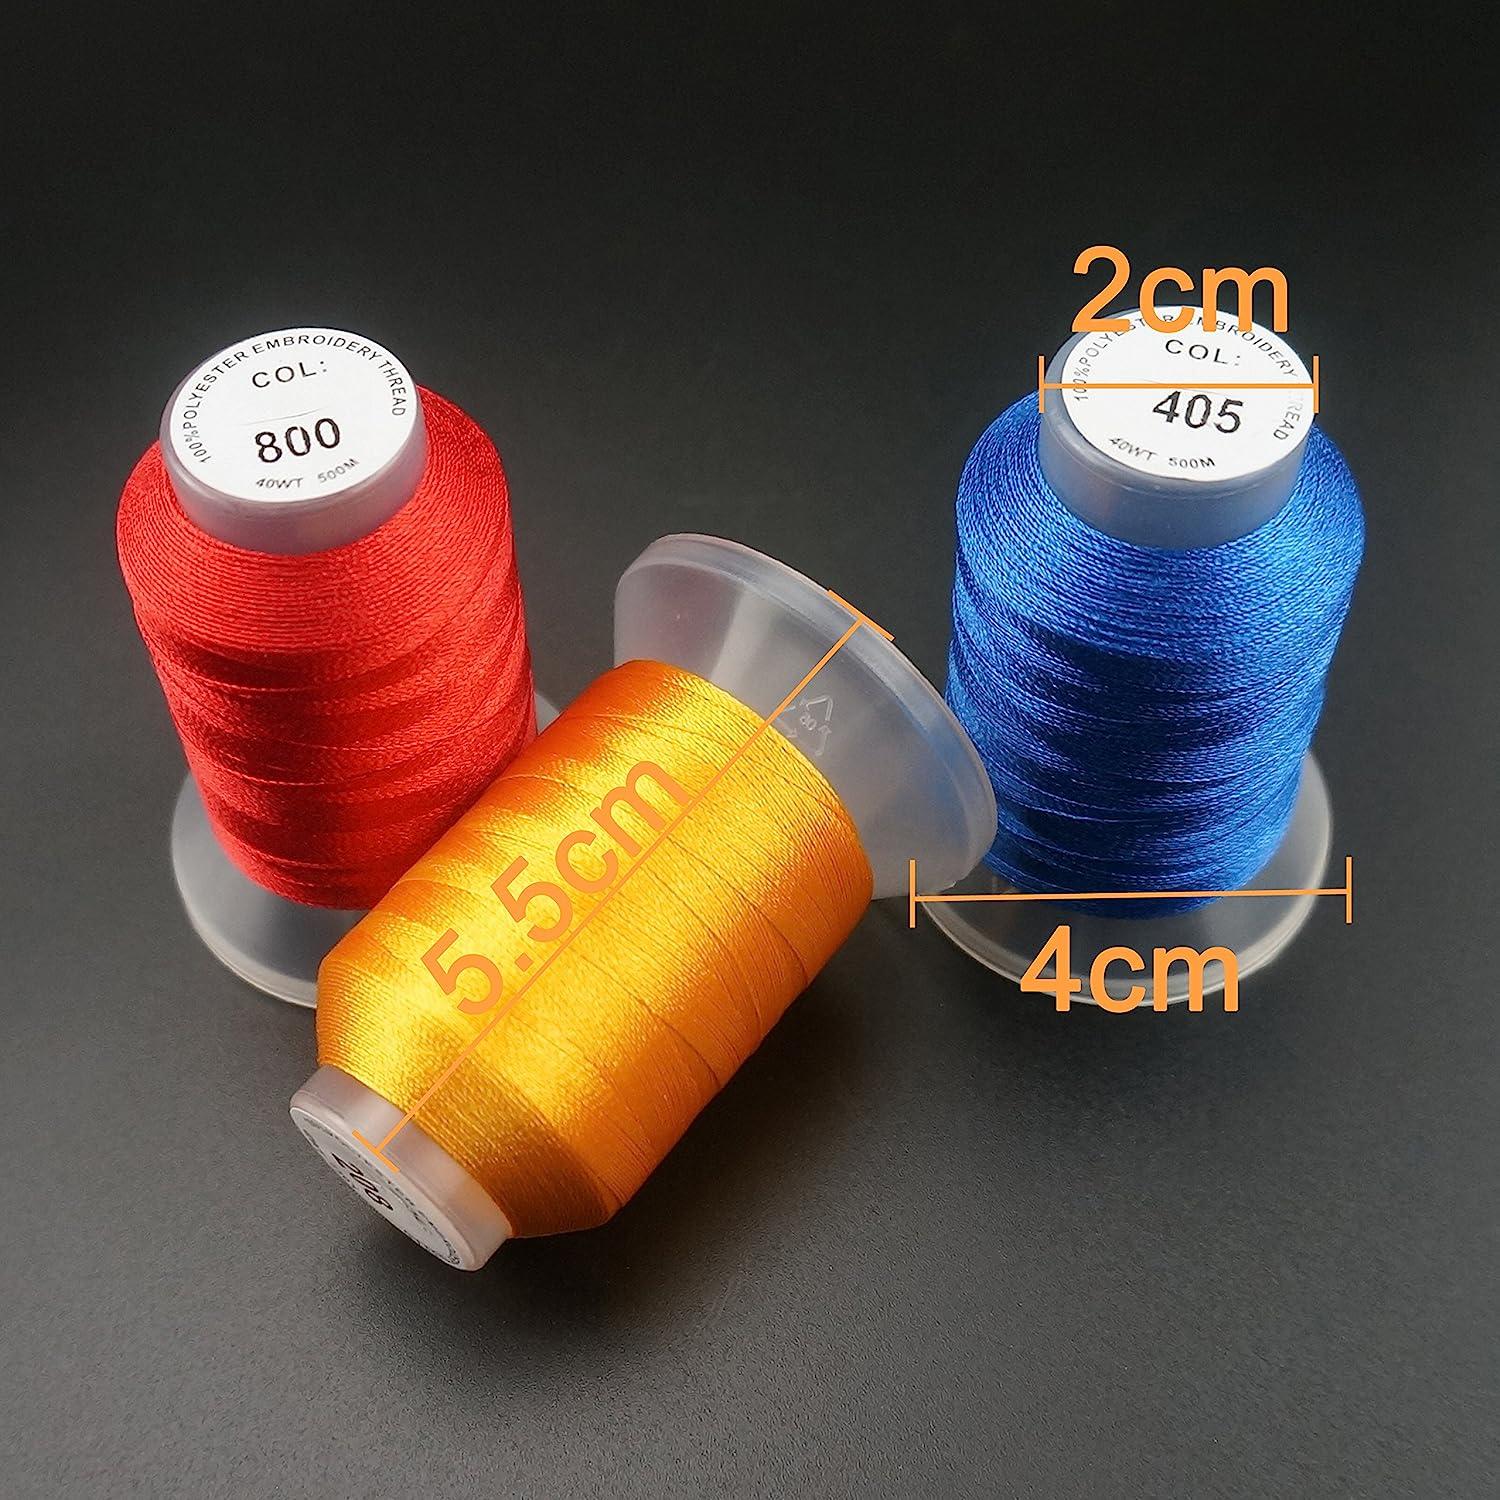 New brothread 80 Spools Polyester Embroidery Machine Thread Kit 500M (550y), Multicolor